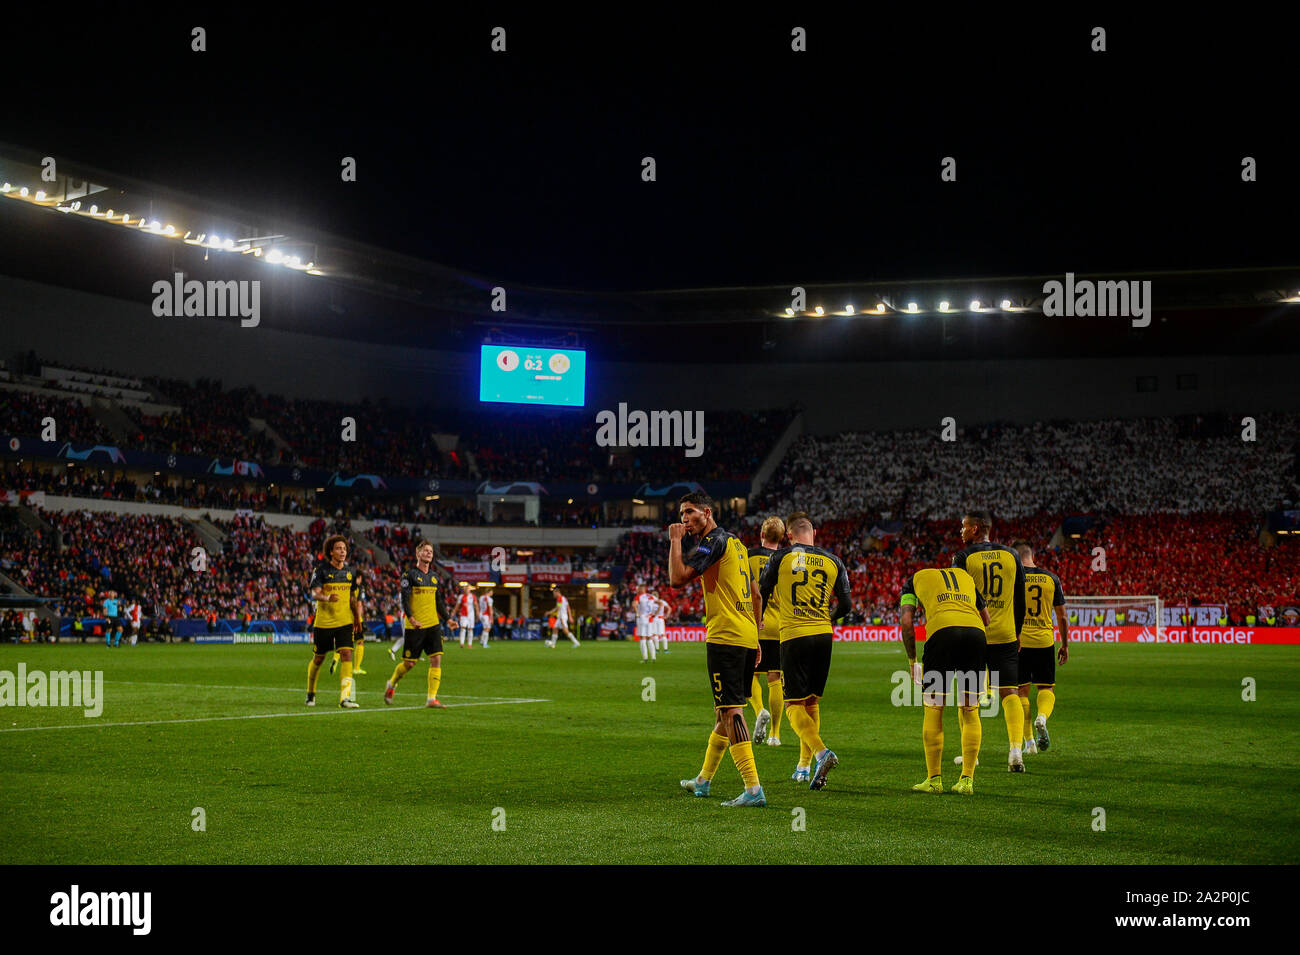 Borussia Dortmund players celebrate during the UEFA Champions League (Group F) match between Slavia Prague and Borussia Dortmund in Prague.(Final score; Slavia Prague 0:2 Borussia Dortmund) Stock Photo